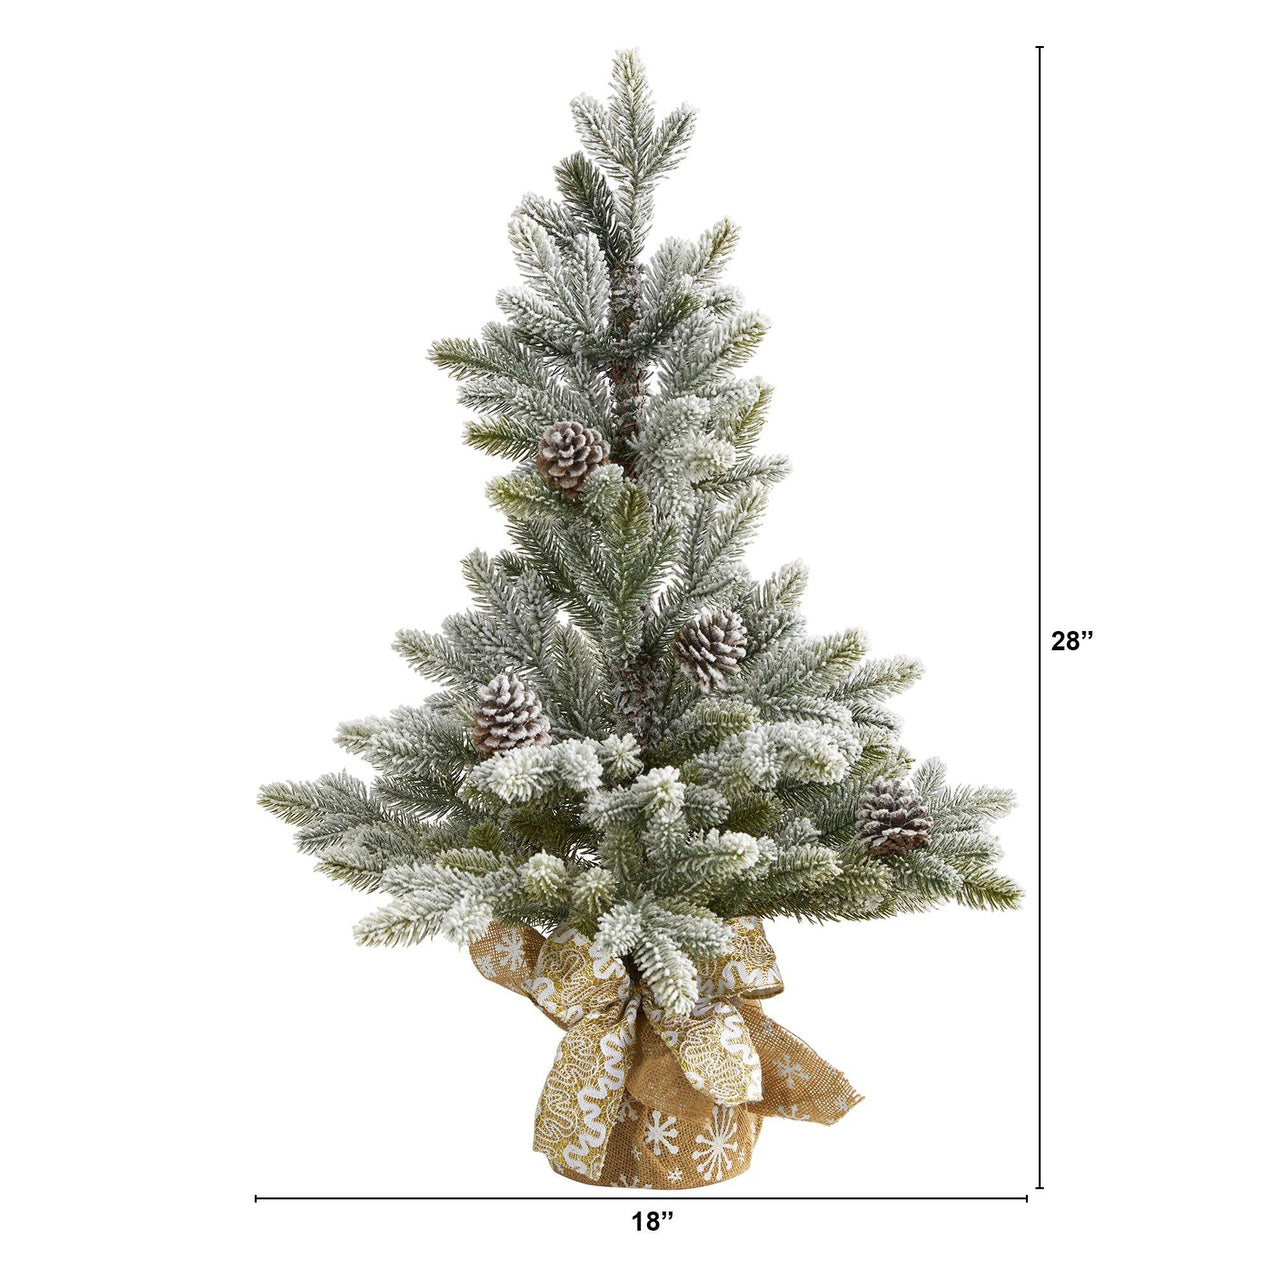 28” Flocked Artificial Christmas Tree with Pine Cones - The Fox Decor